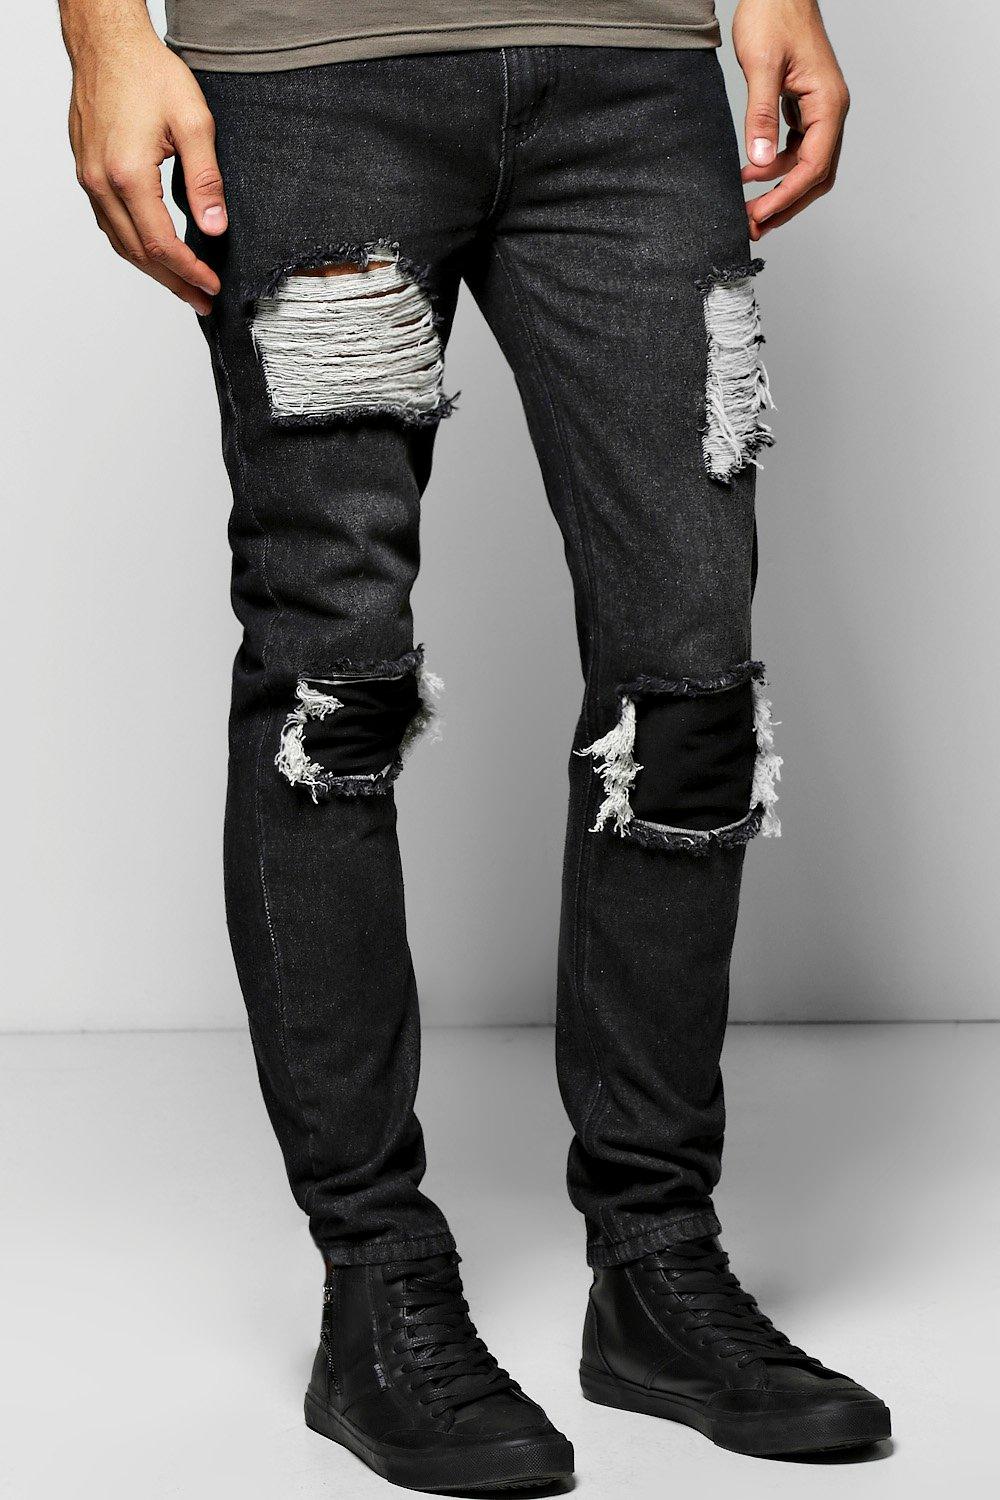 mens ripped and repaired jeans